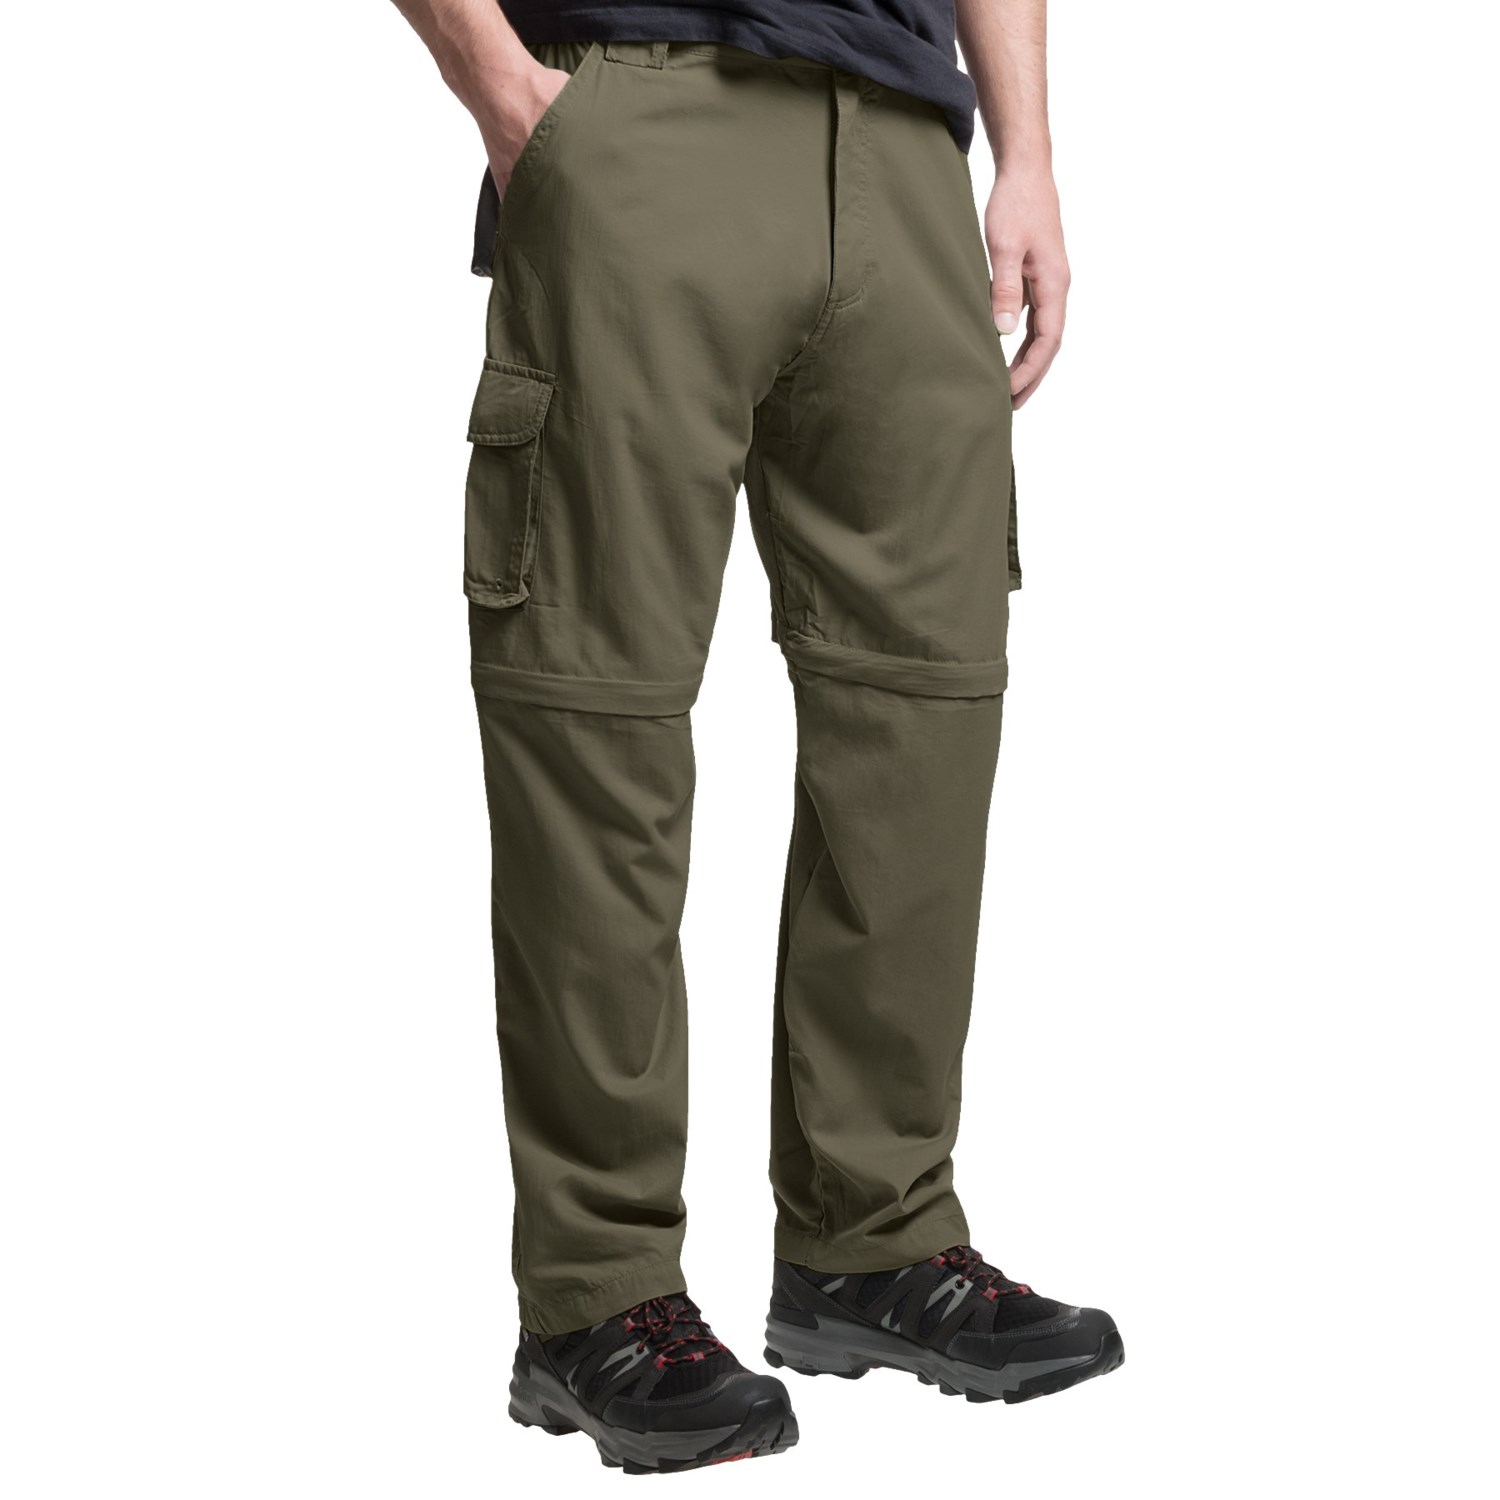 Dakota Grizzly Belted Cargo Pants (For Men) - Save 57%